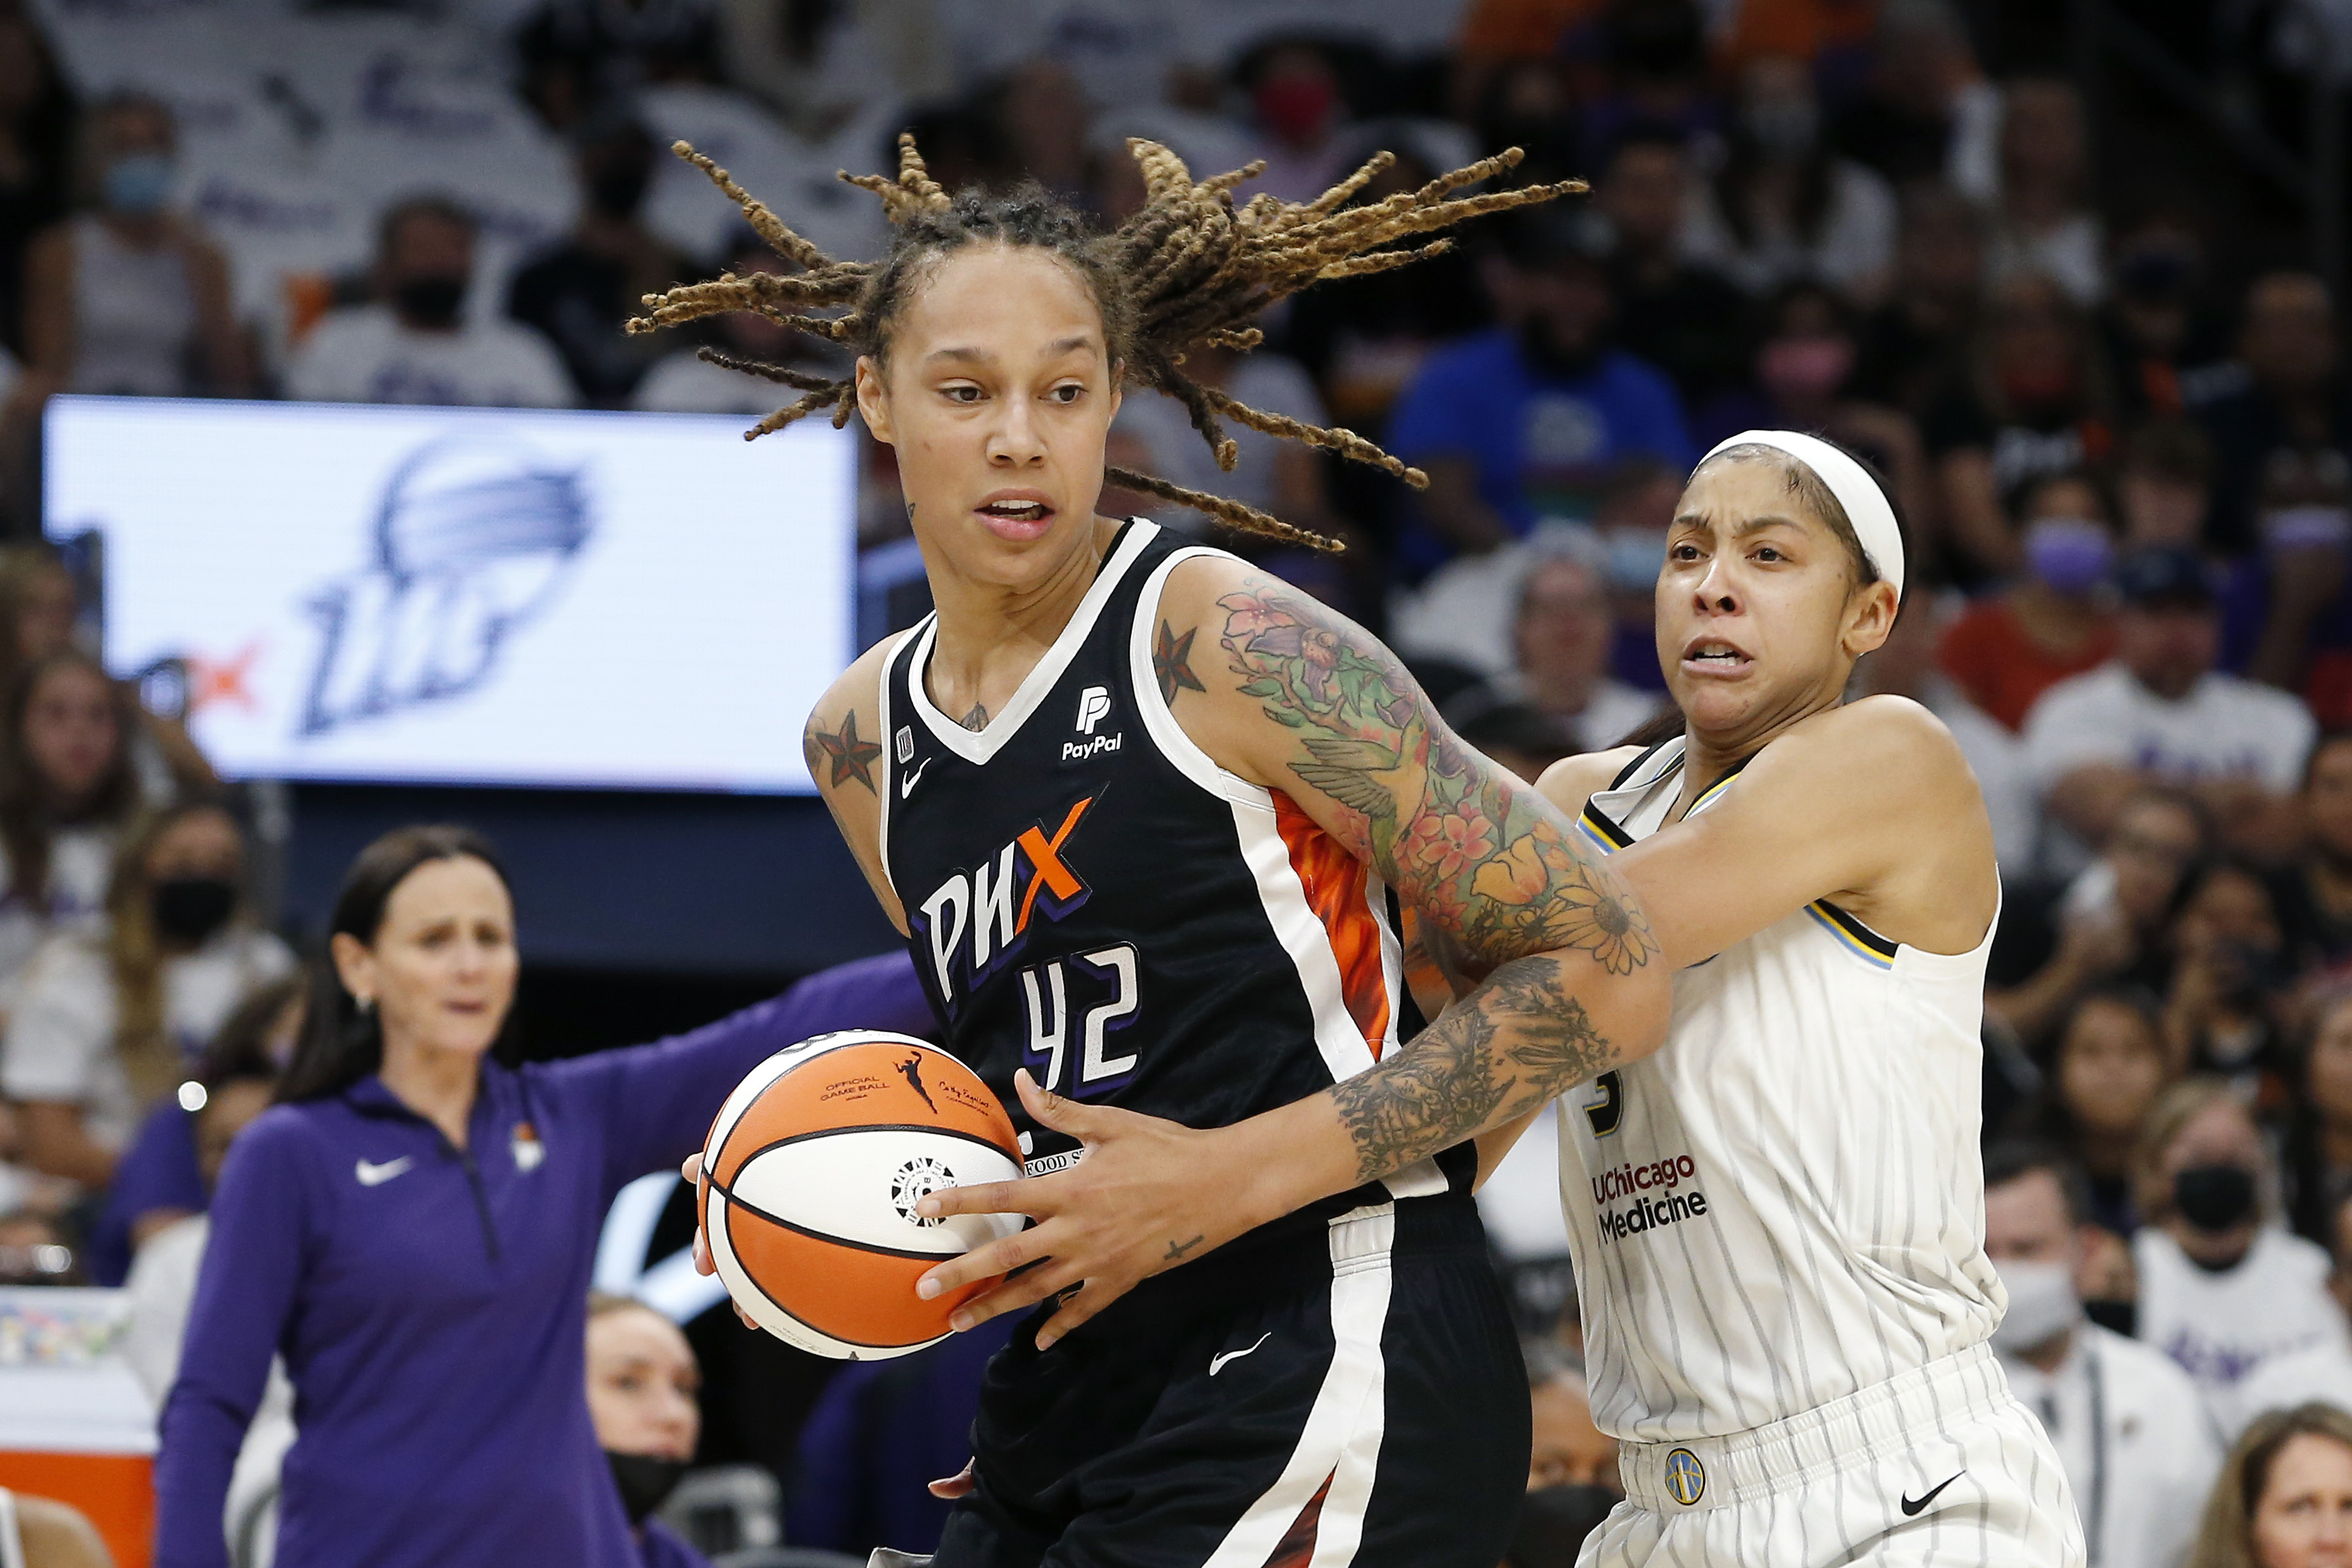 Phoenix Mercury center Brittney Griner (42) drives past Chicago Sky forward Candace Parker (3) during the first half of Game 1 of the WNBA basketball Finals on Sunday in Phoenix.